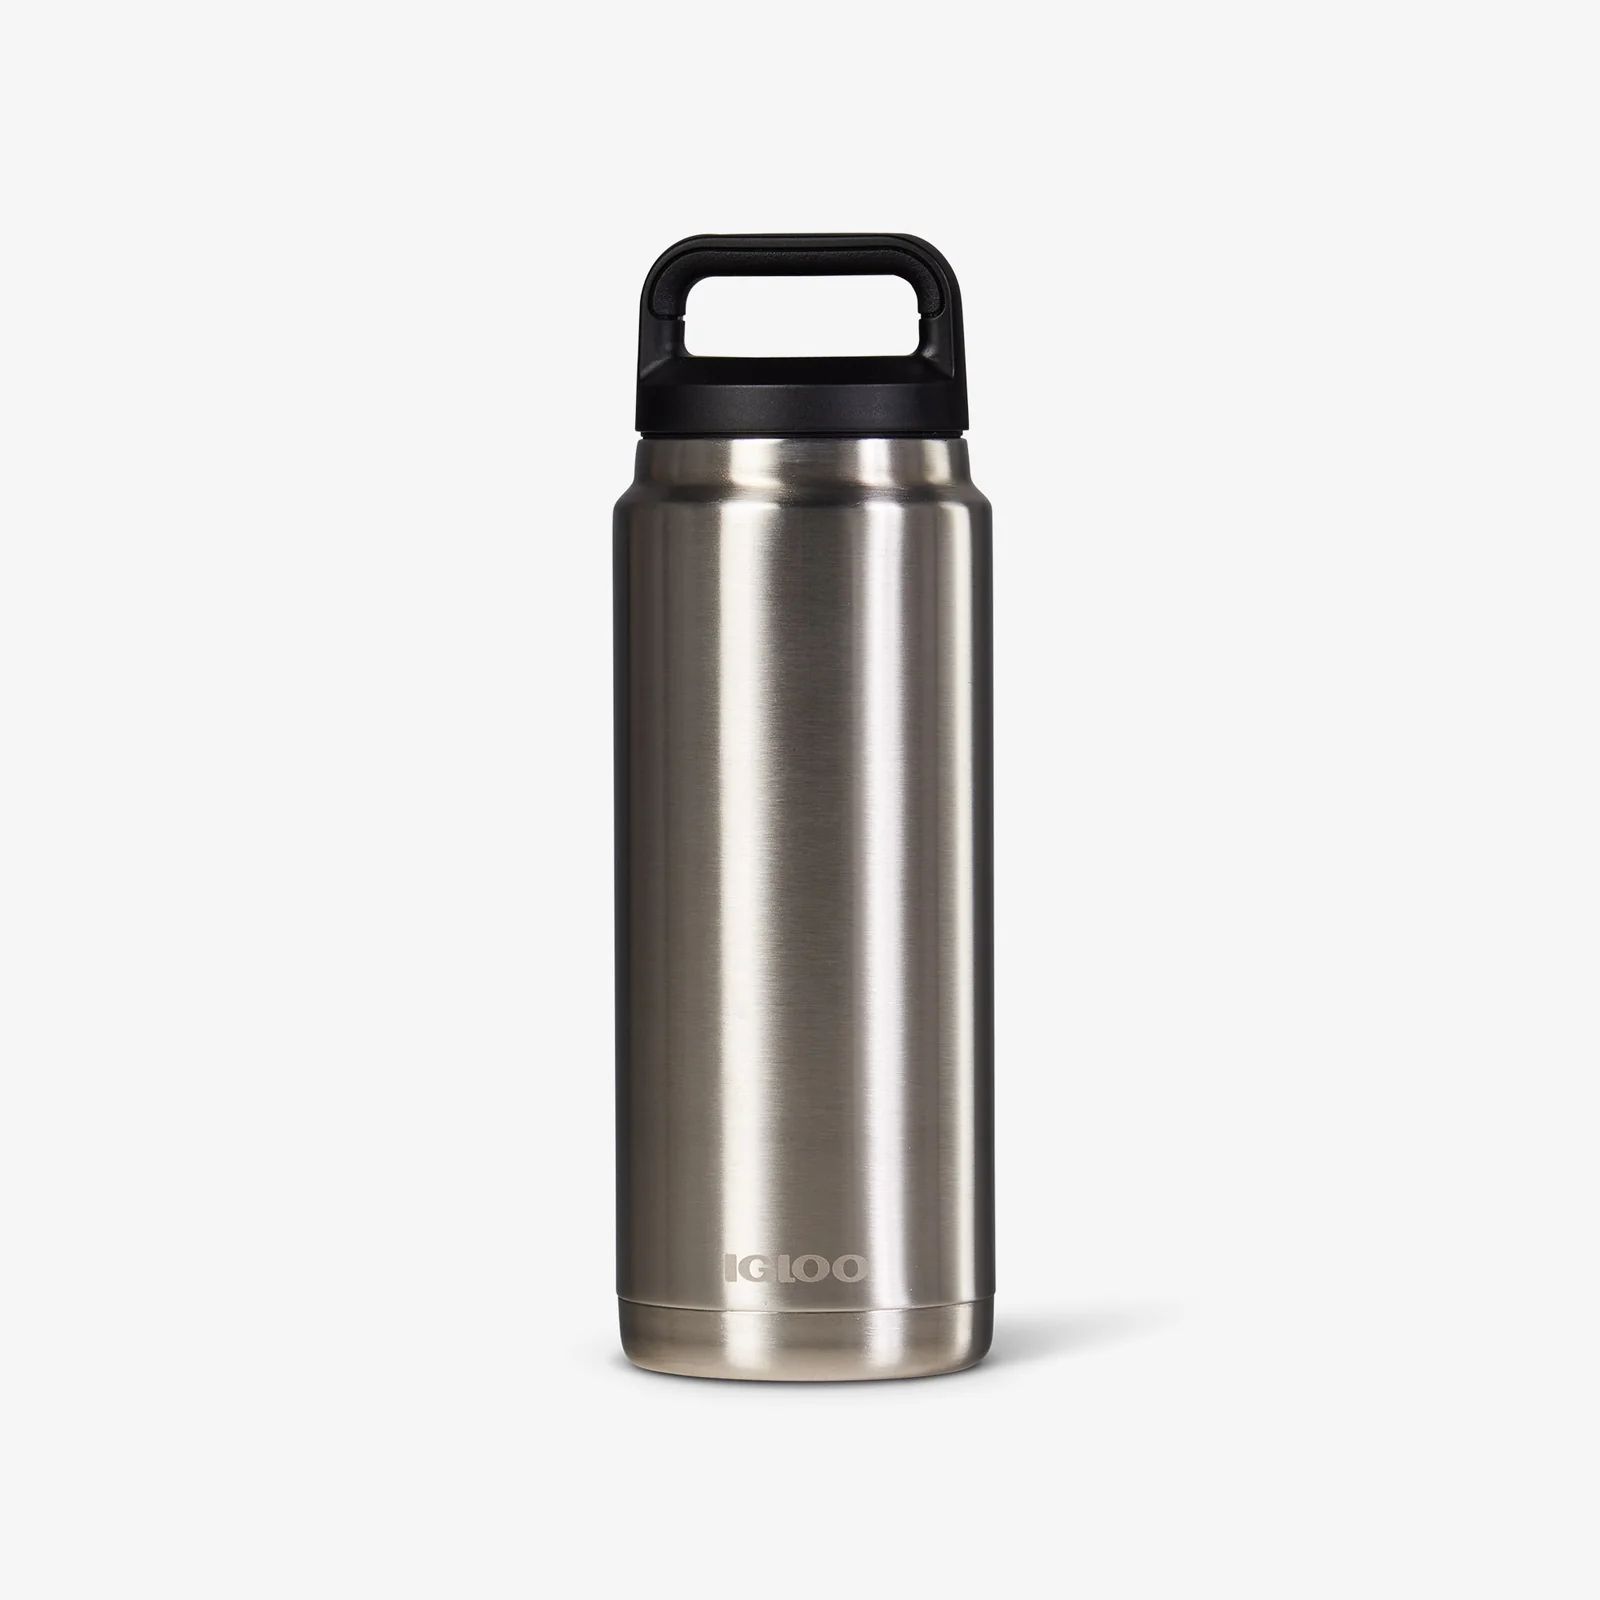 26 Oz Stainless Steel Bottle | Igloo Coolers